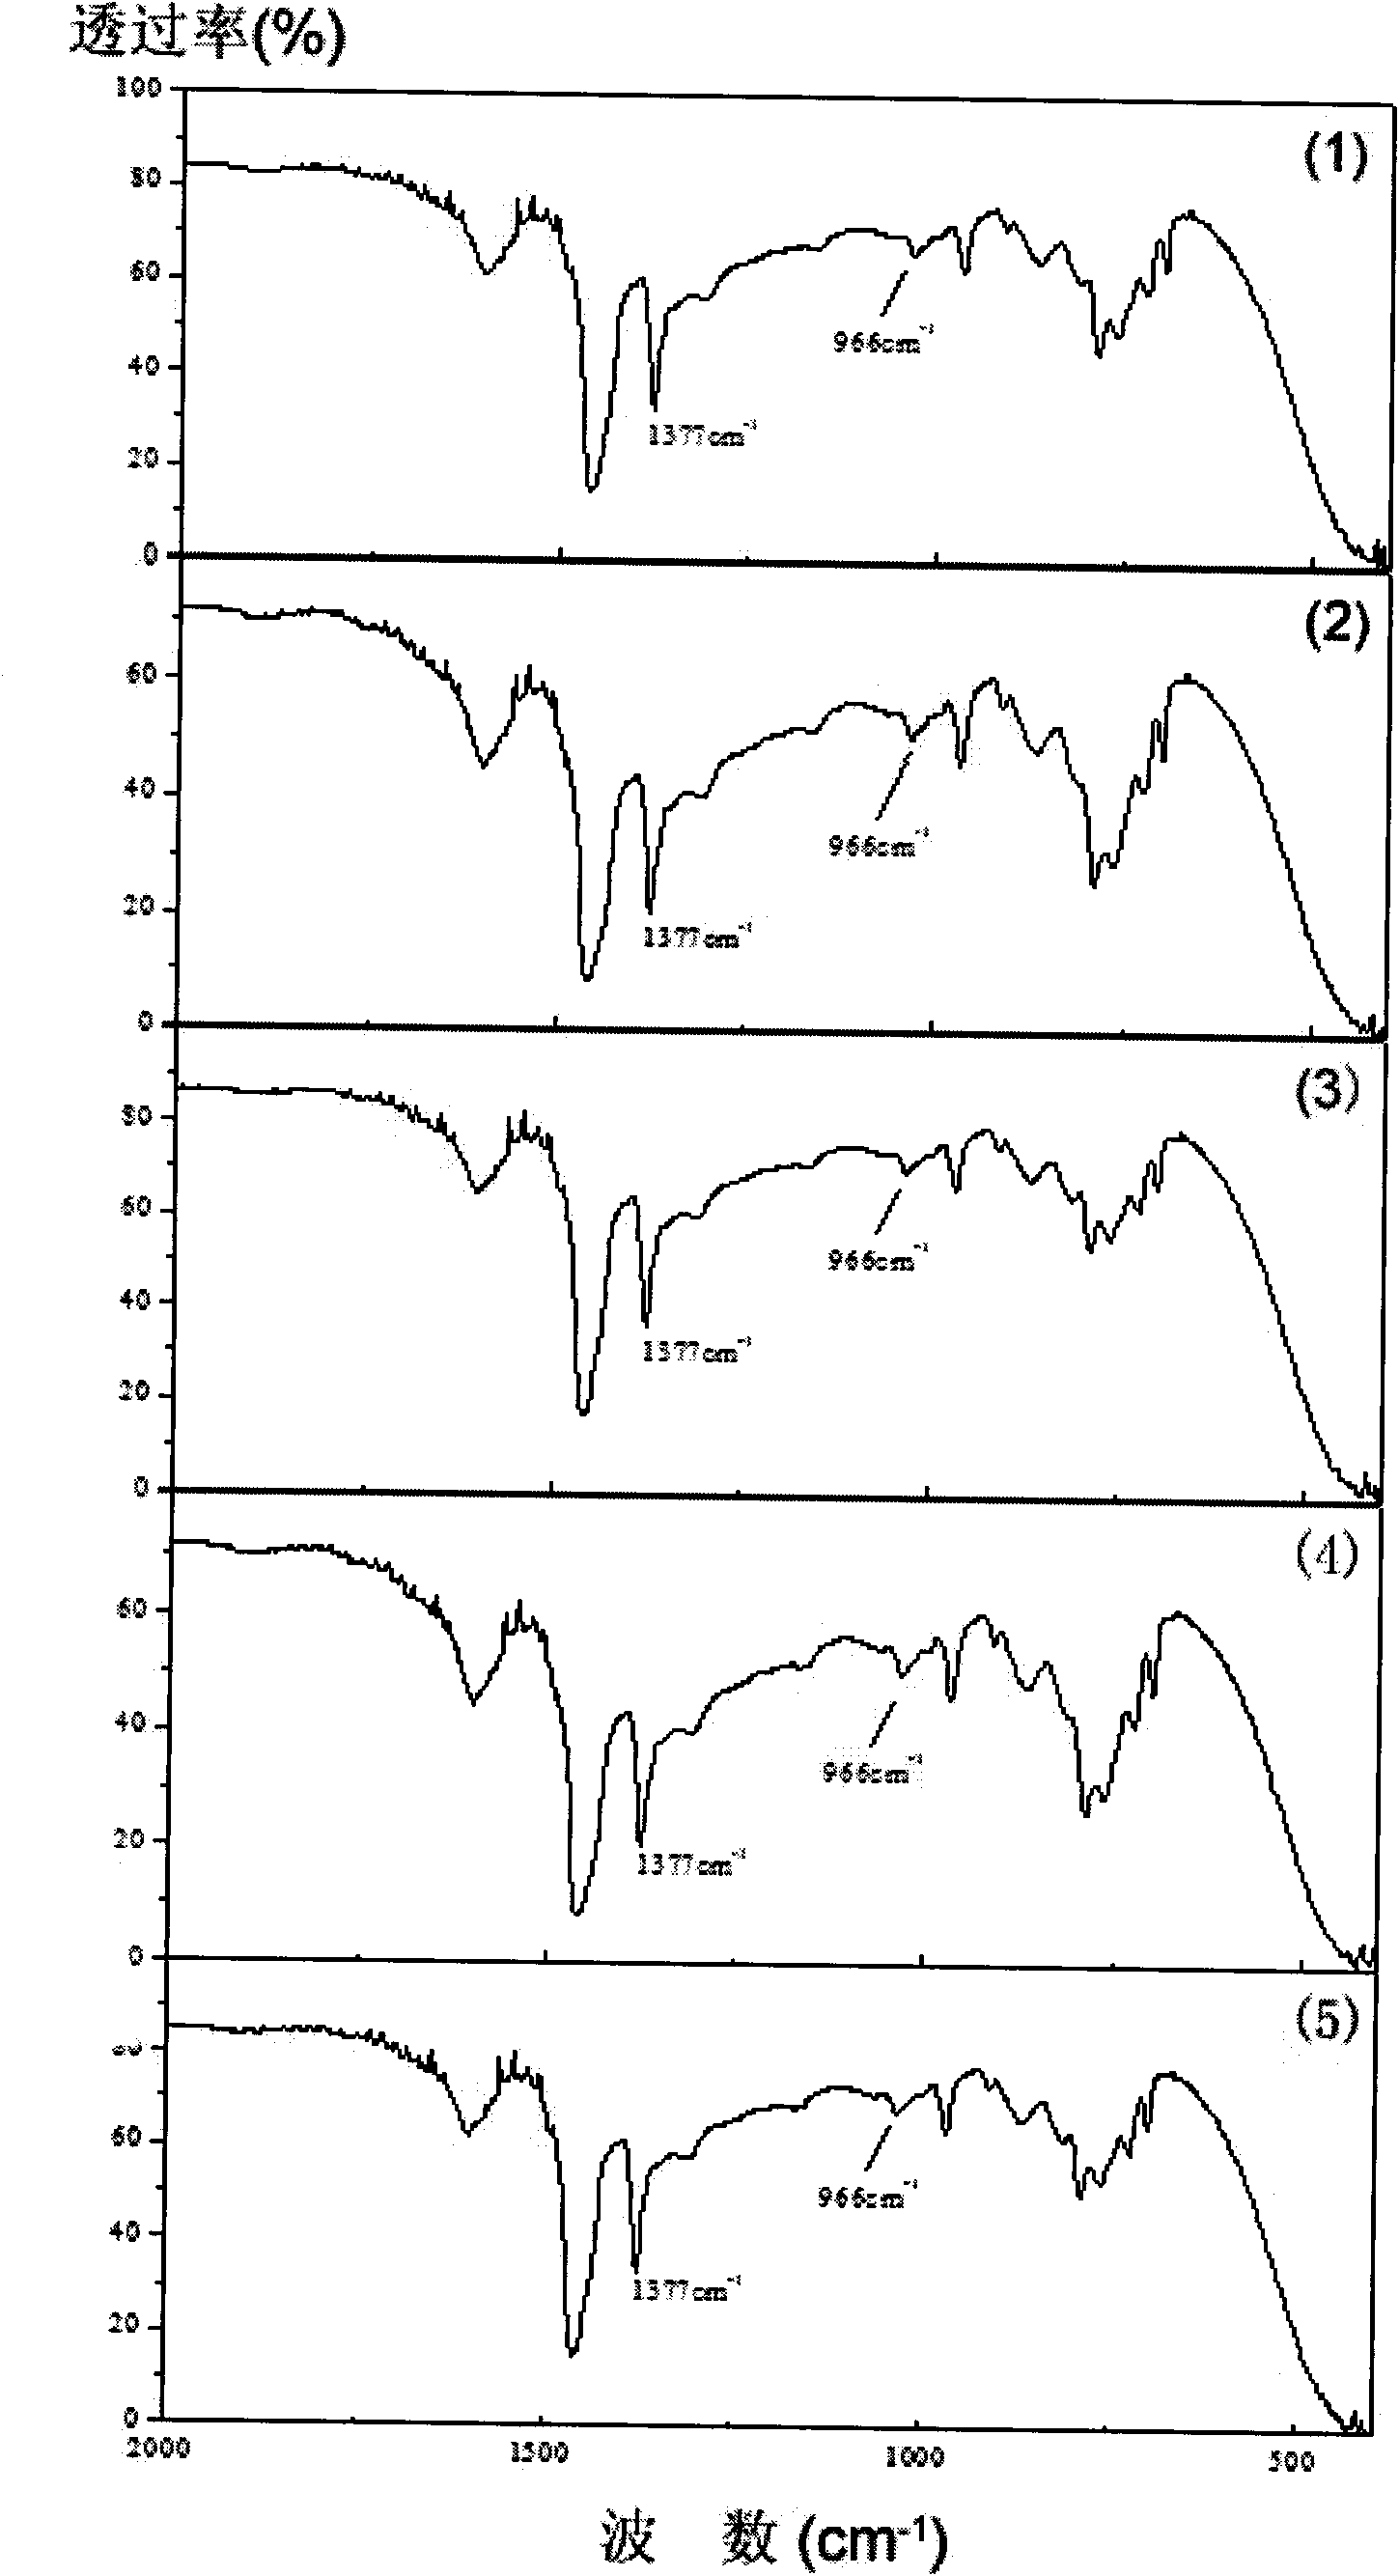 Method for performing infrared spectroscopic analysis on SBS modifier content of modified asphalt